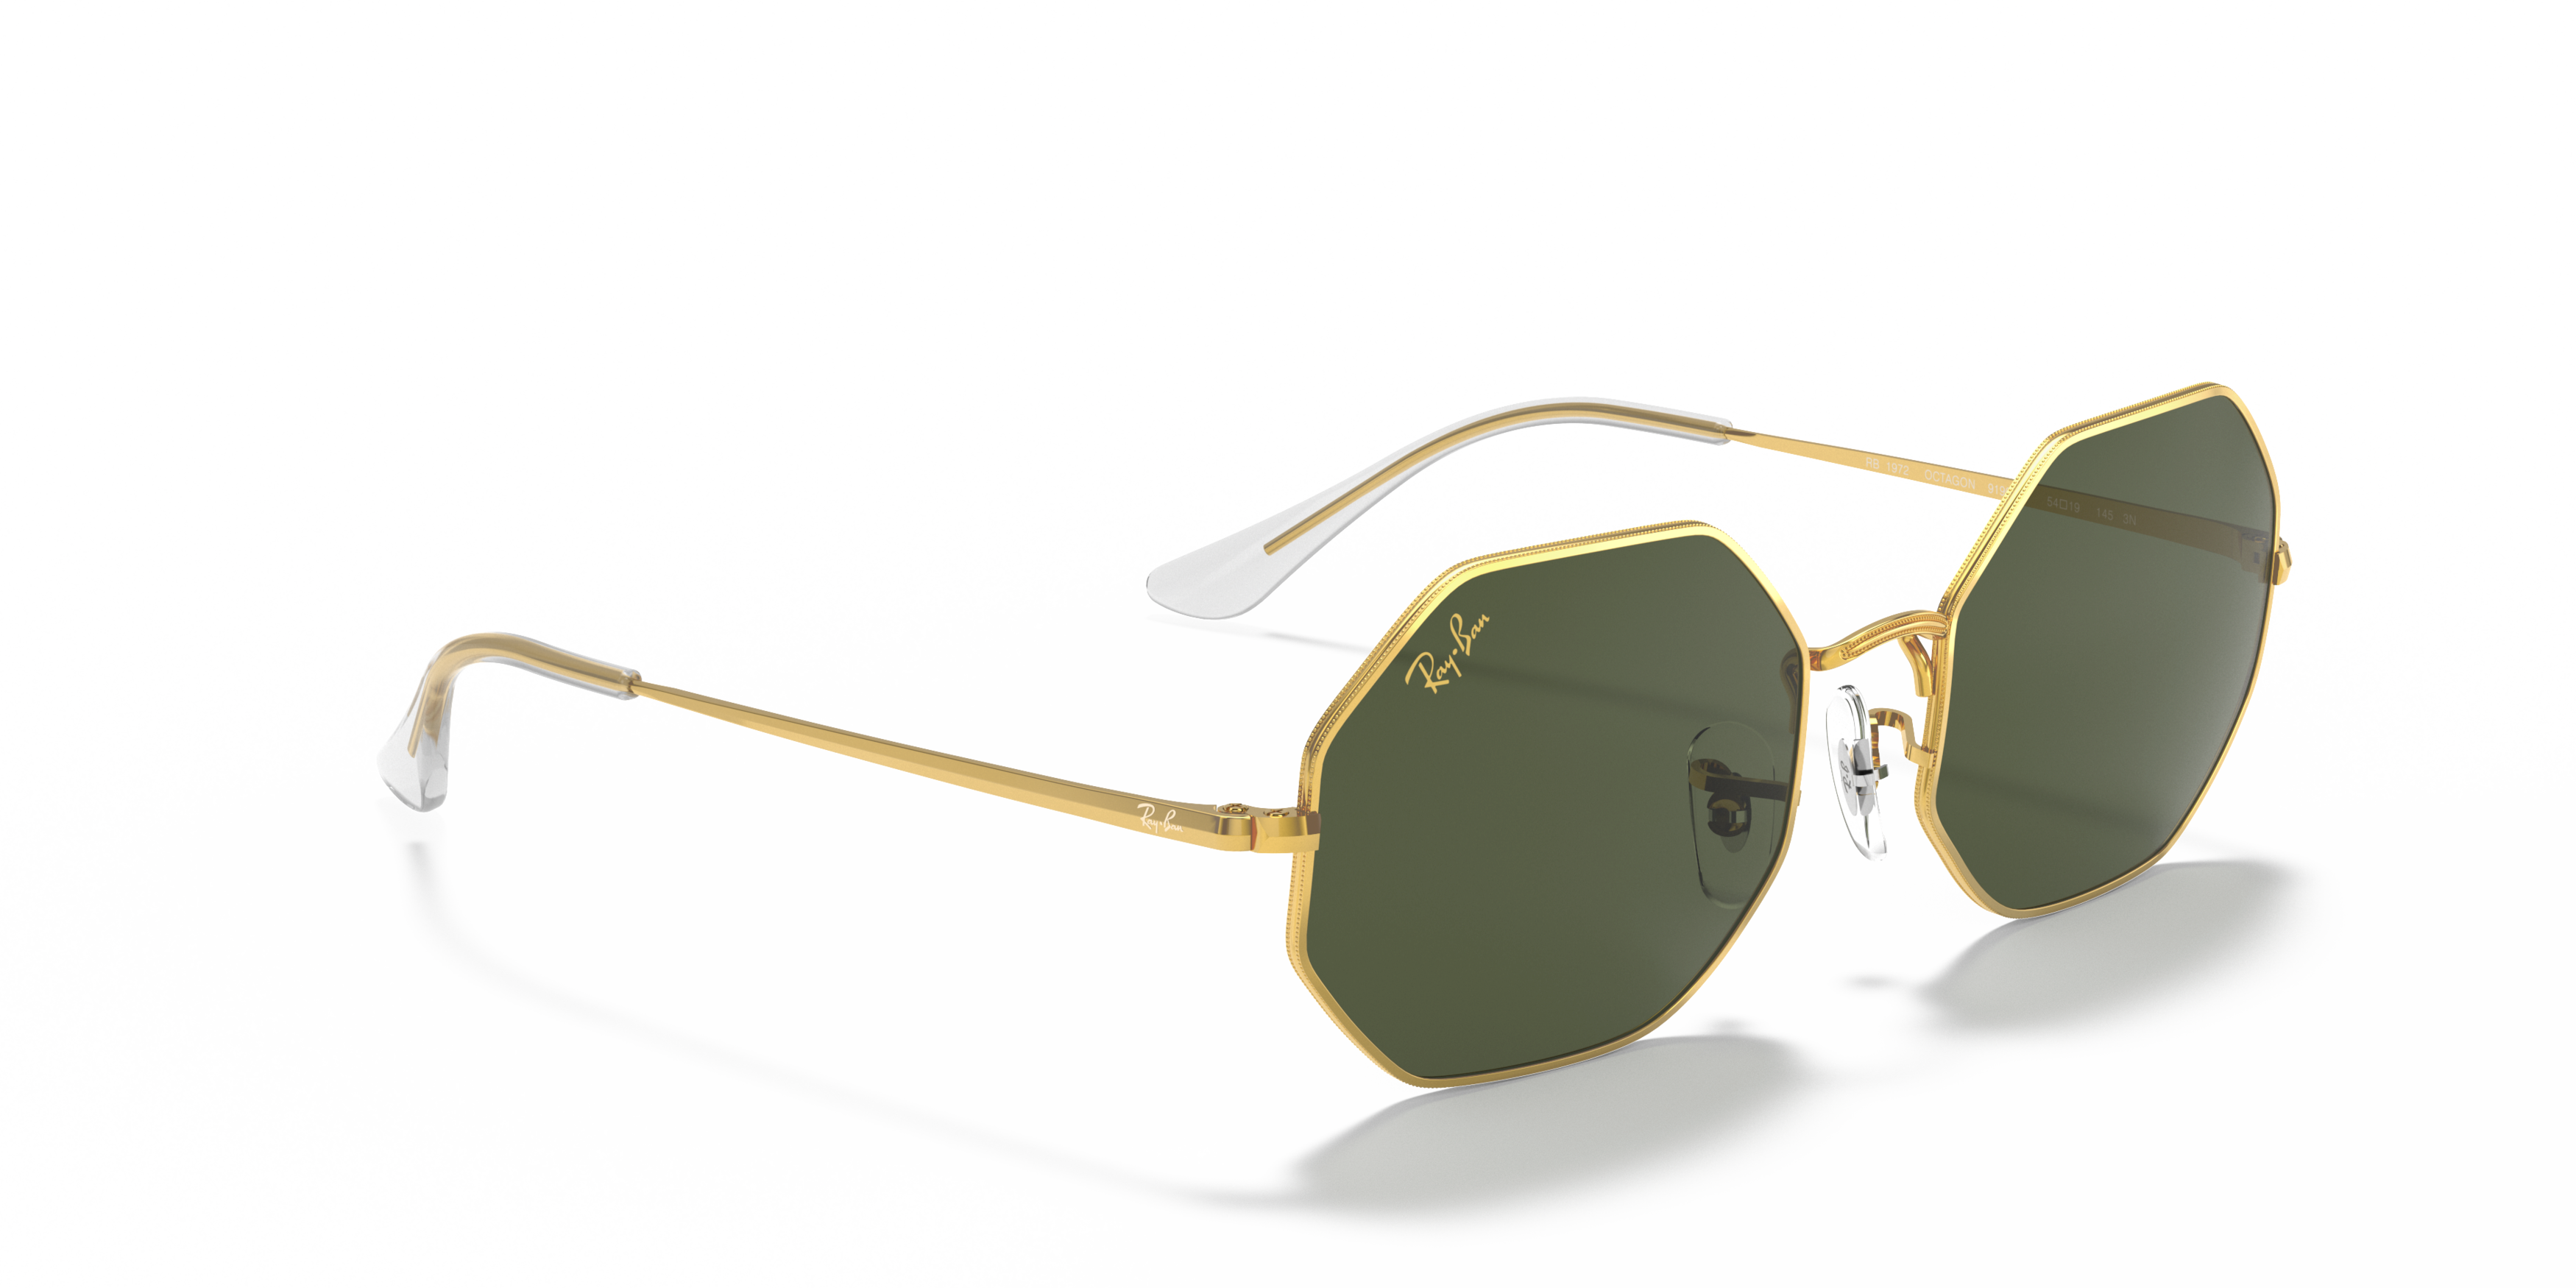 Angle_Right01 Ray Ban Octagon 0RB1972 919631 Verde / Oro